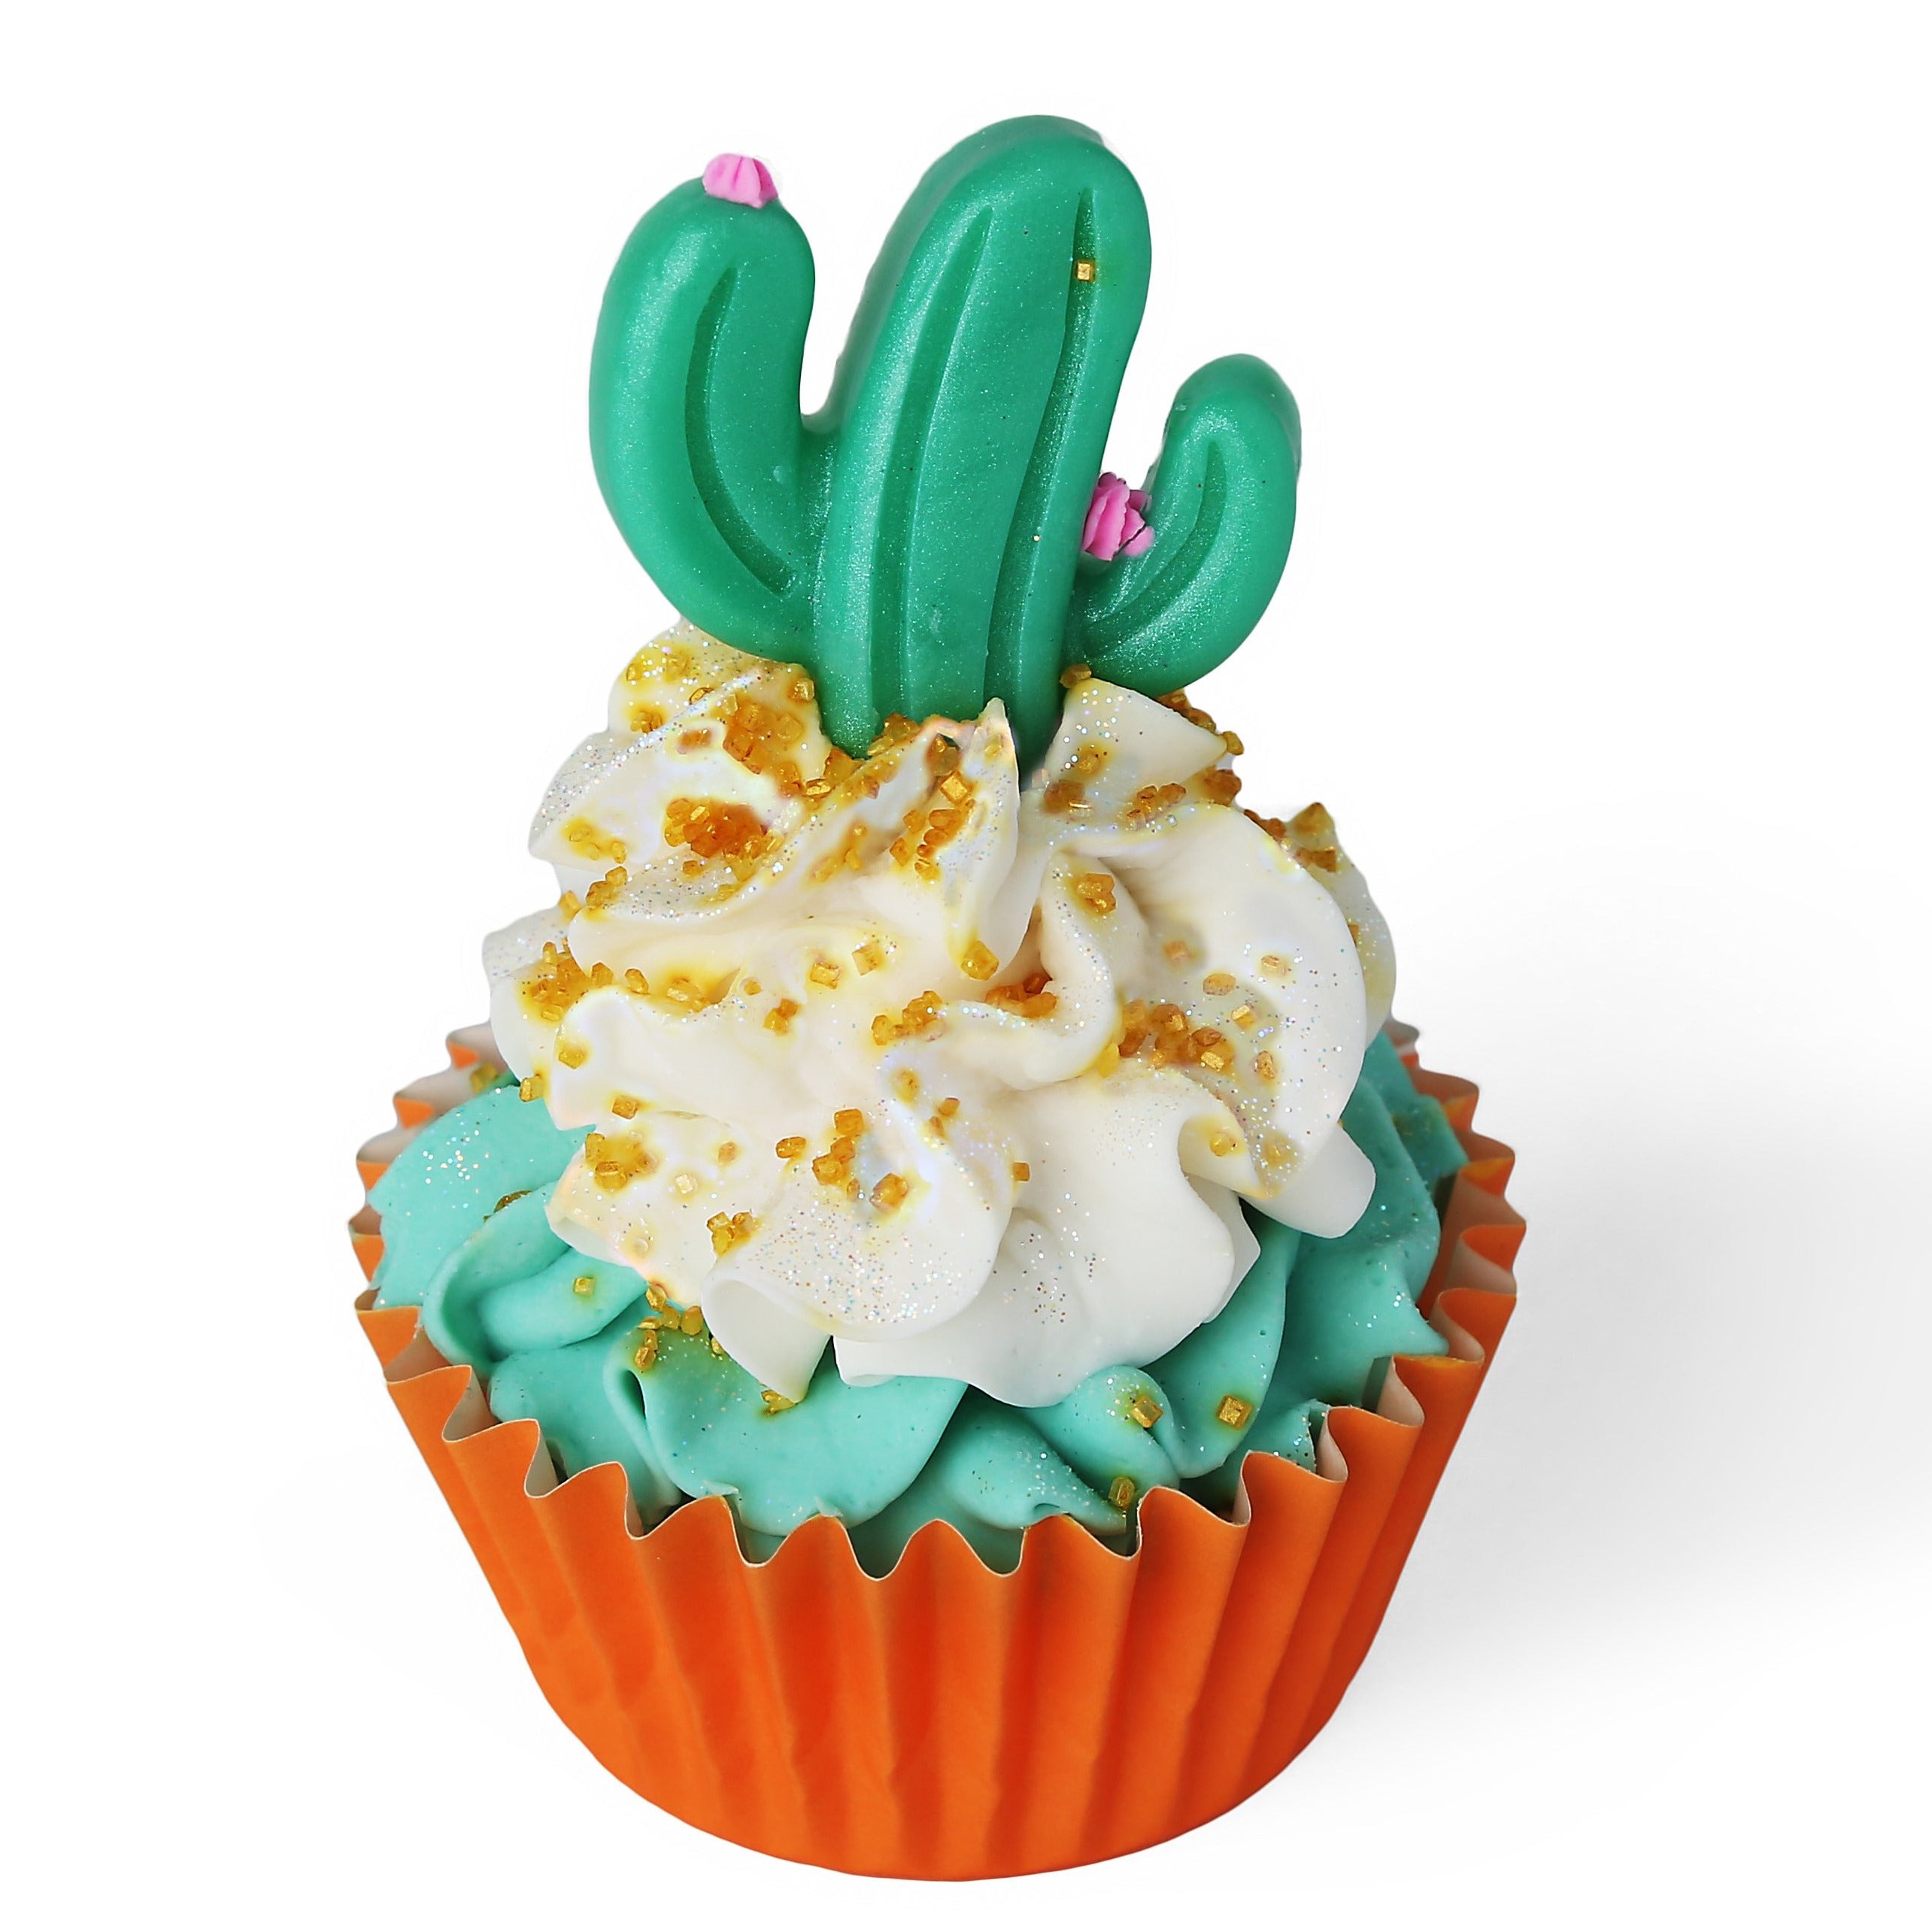 Cactus themed soap cupcake. Burnt orange liner with teal soap frosting with white soap frosting on top with gold glitter. Adorned with a green shaped cactus with tiny pink flowers